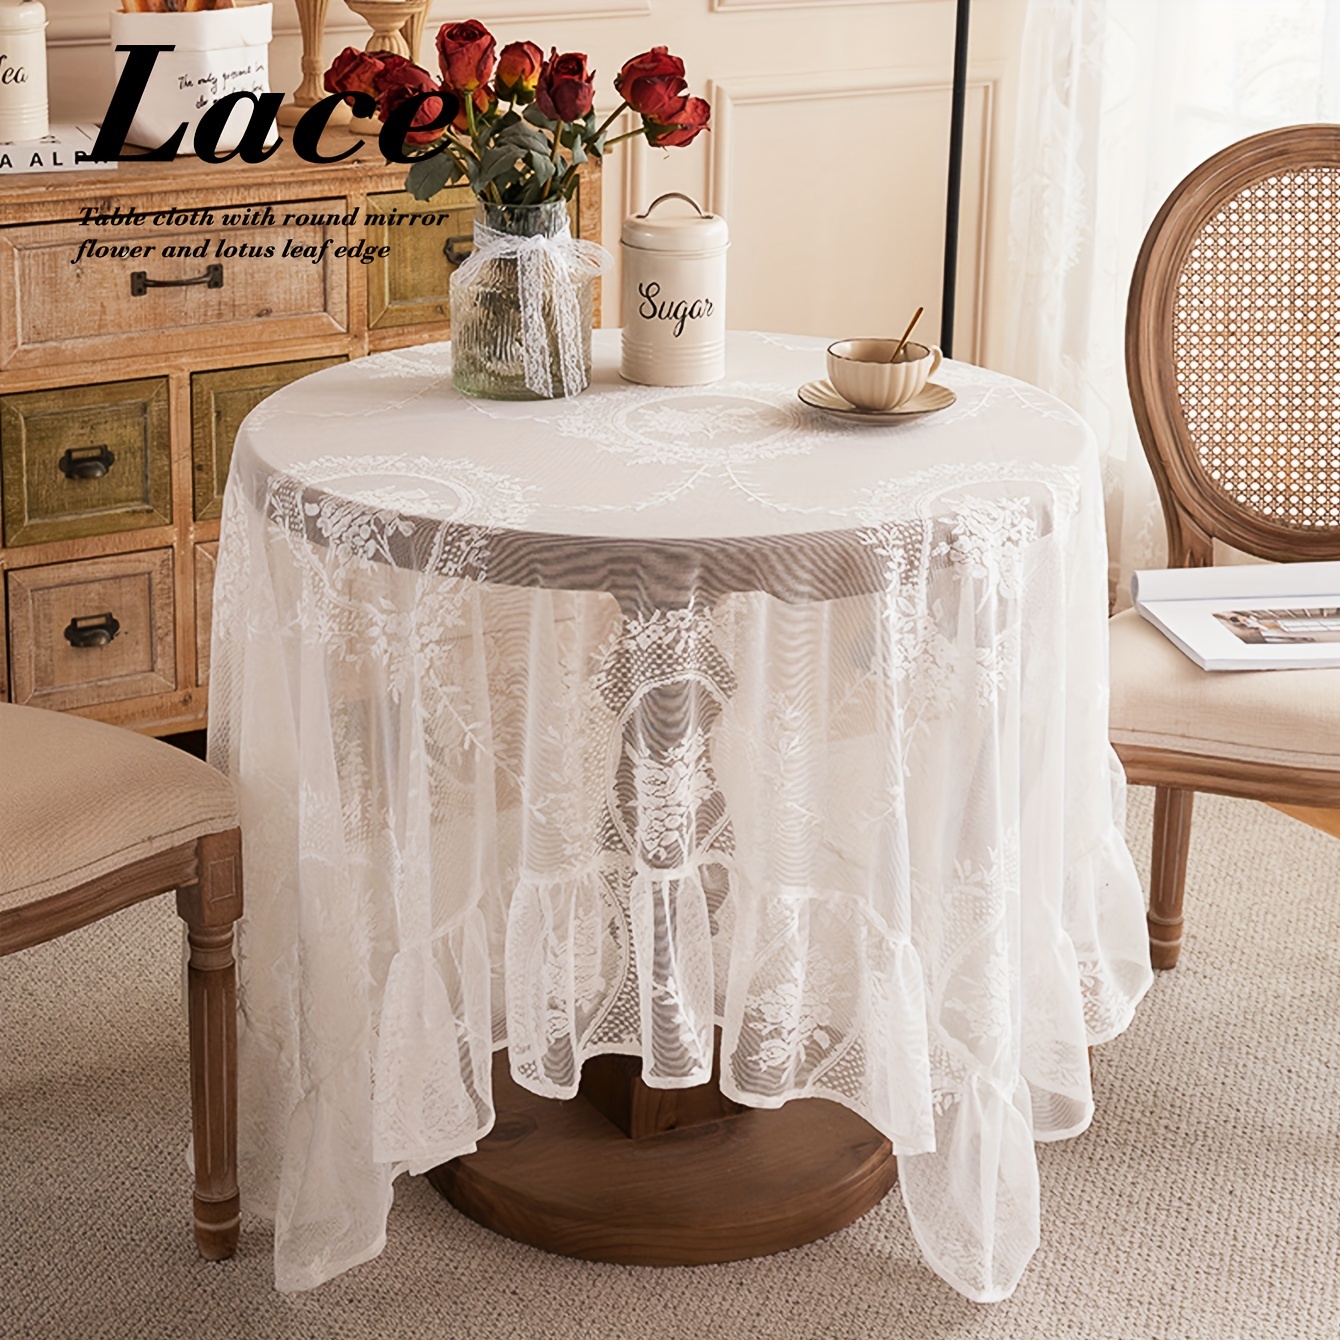 

Elegant Floral Embroidered Lace Tablecloth - White/green, Pleated Edges, Cotton-linen Blend, Perfect For Dining & Special Occasions